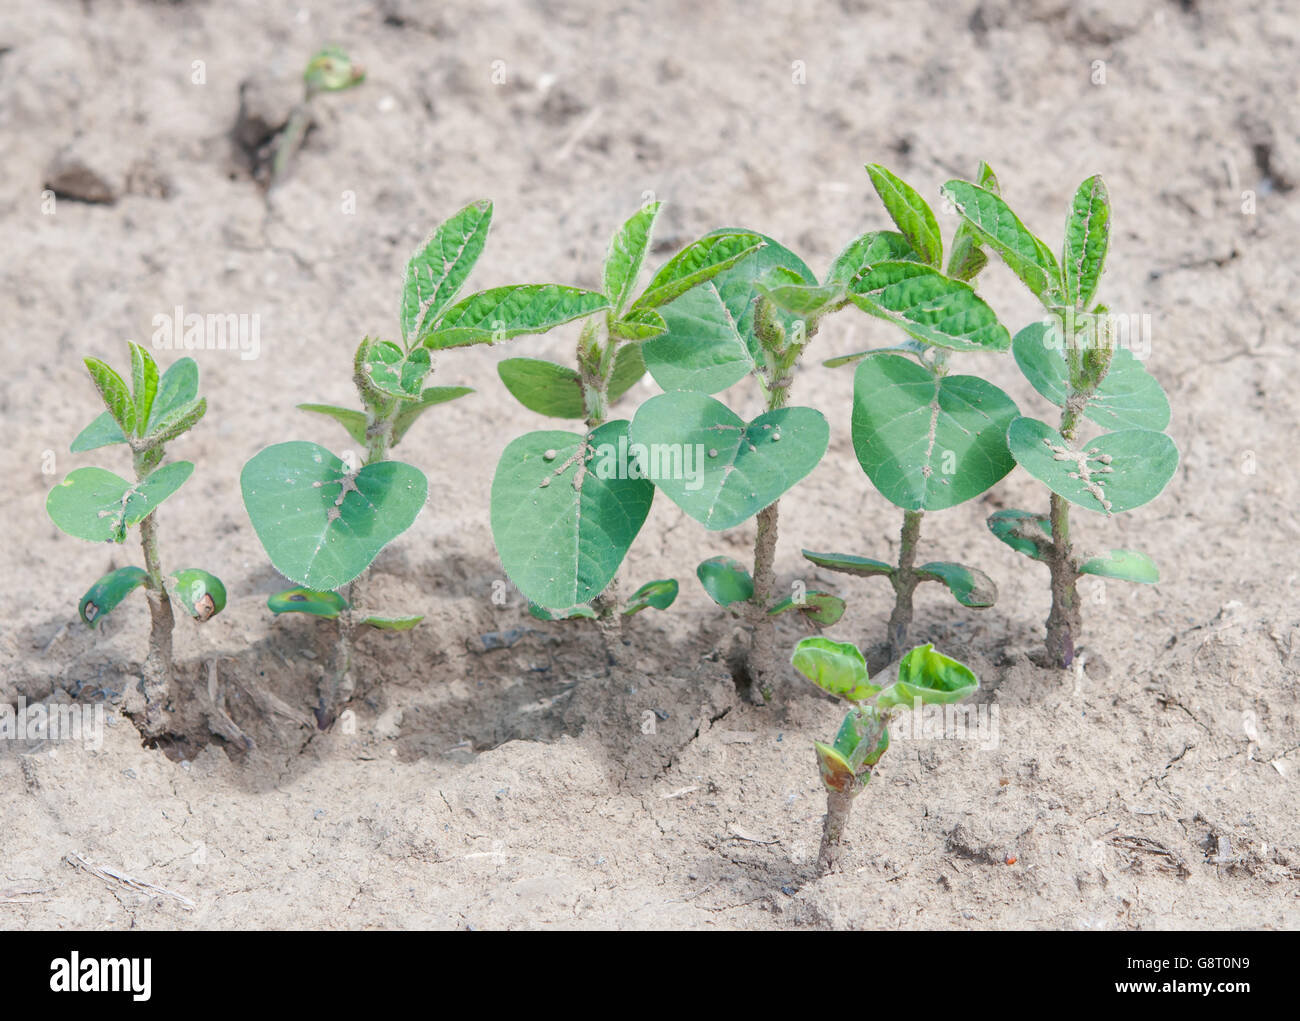 soybean Field Rows in spring Stock Photo